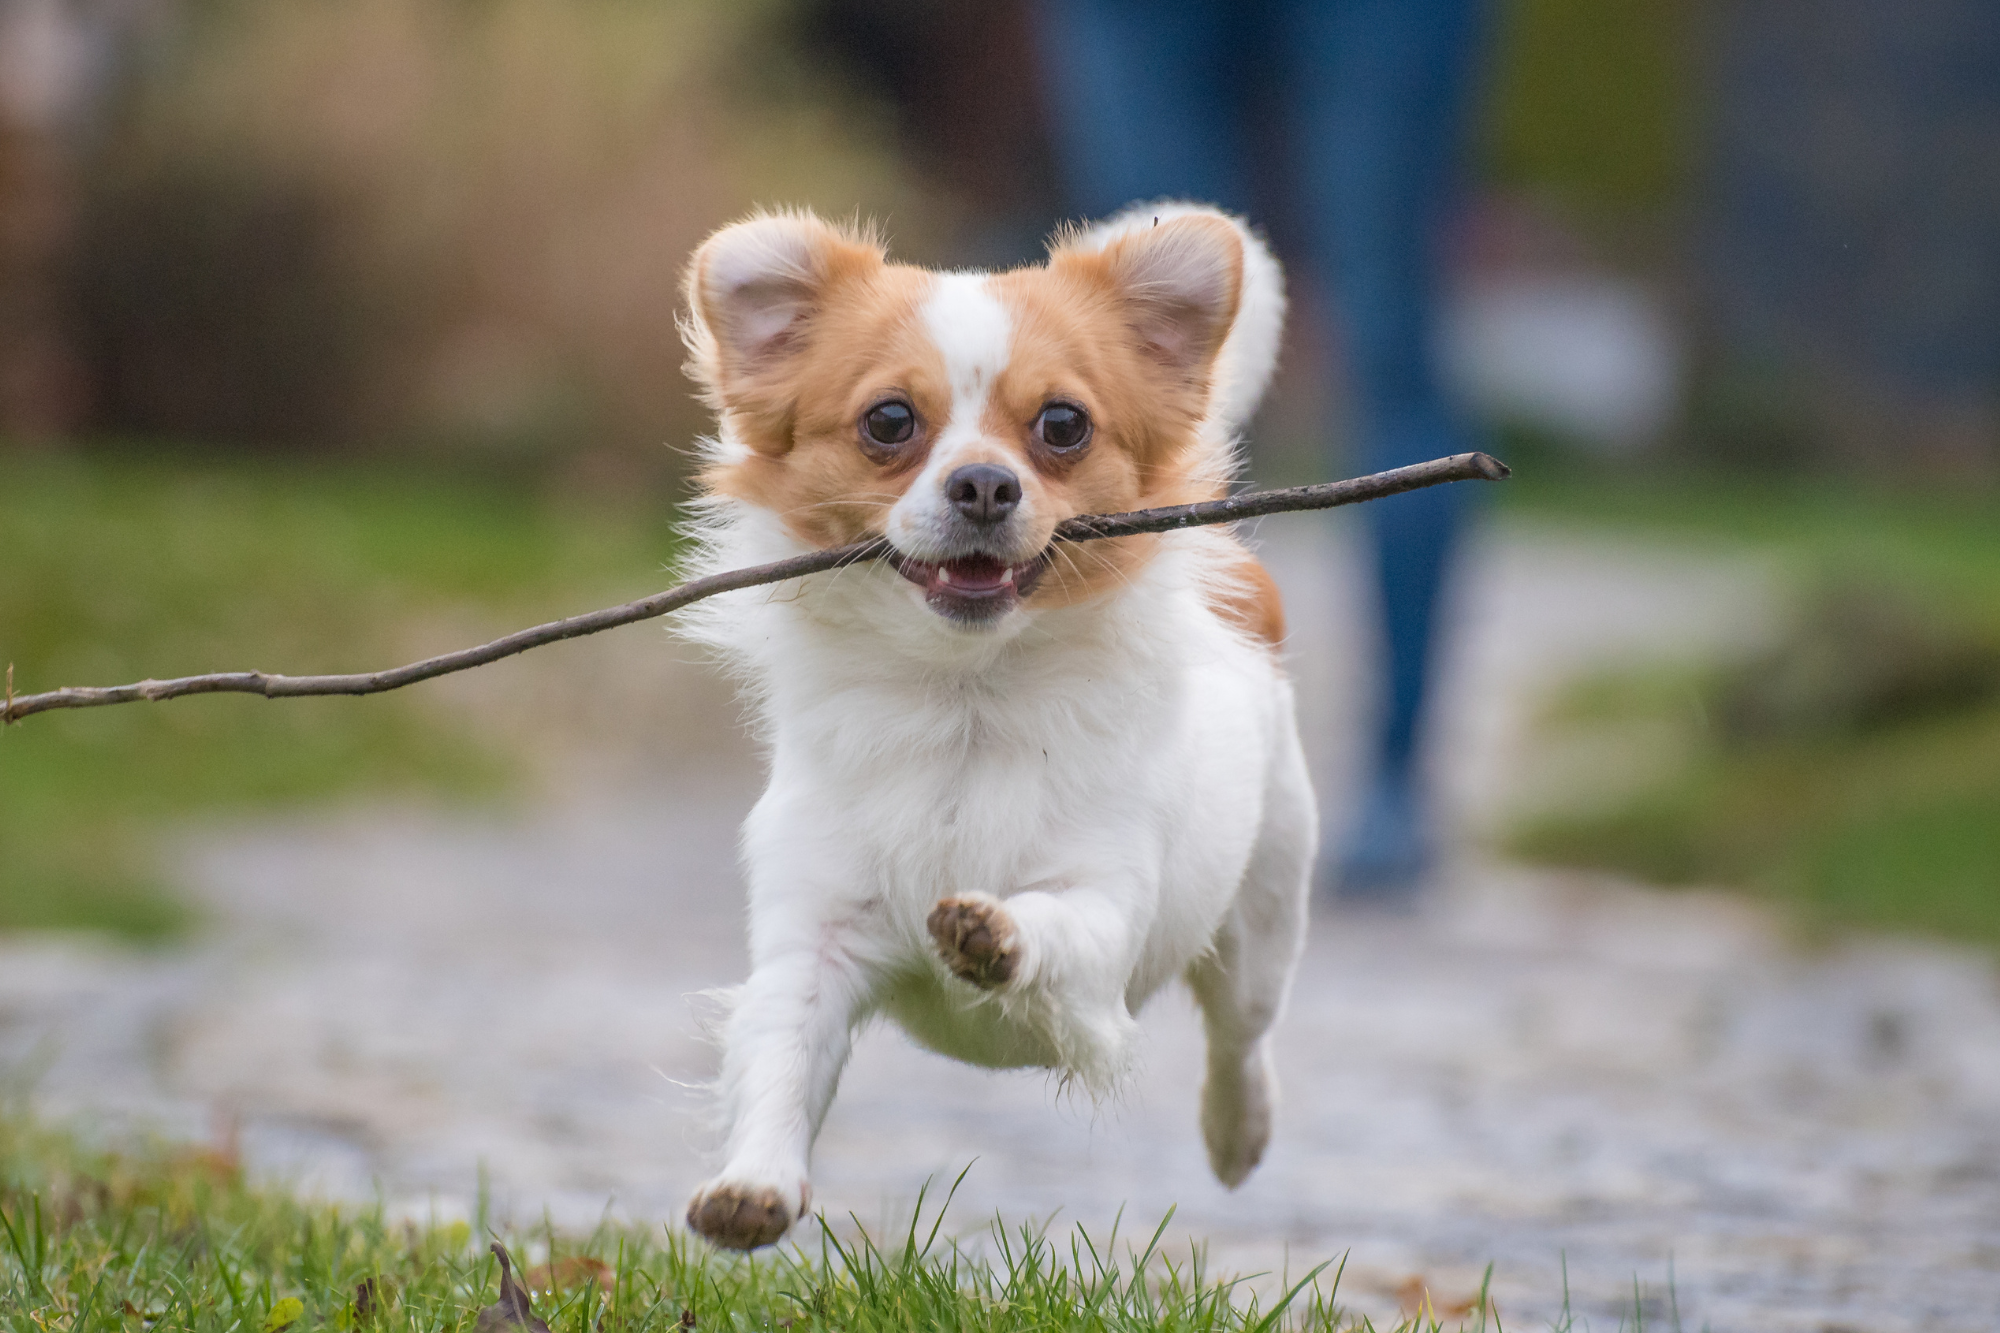 Chihuahua running while holding a stick in its mouth